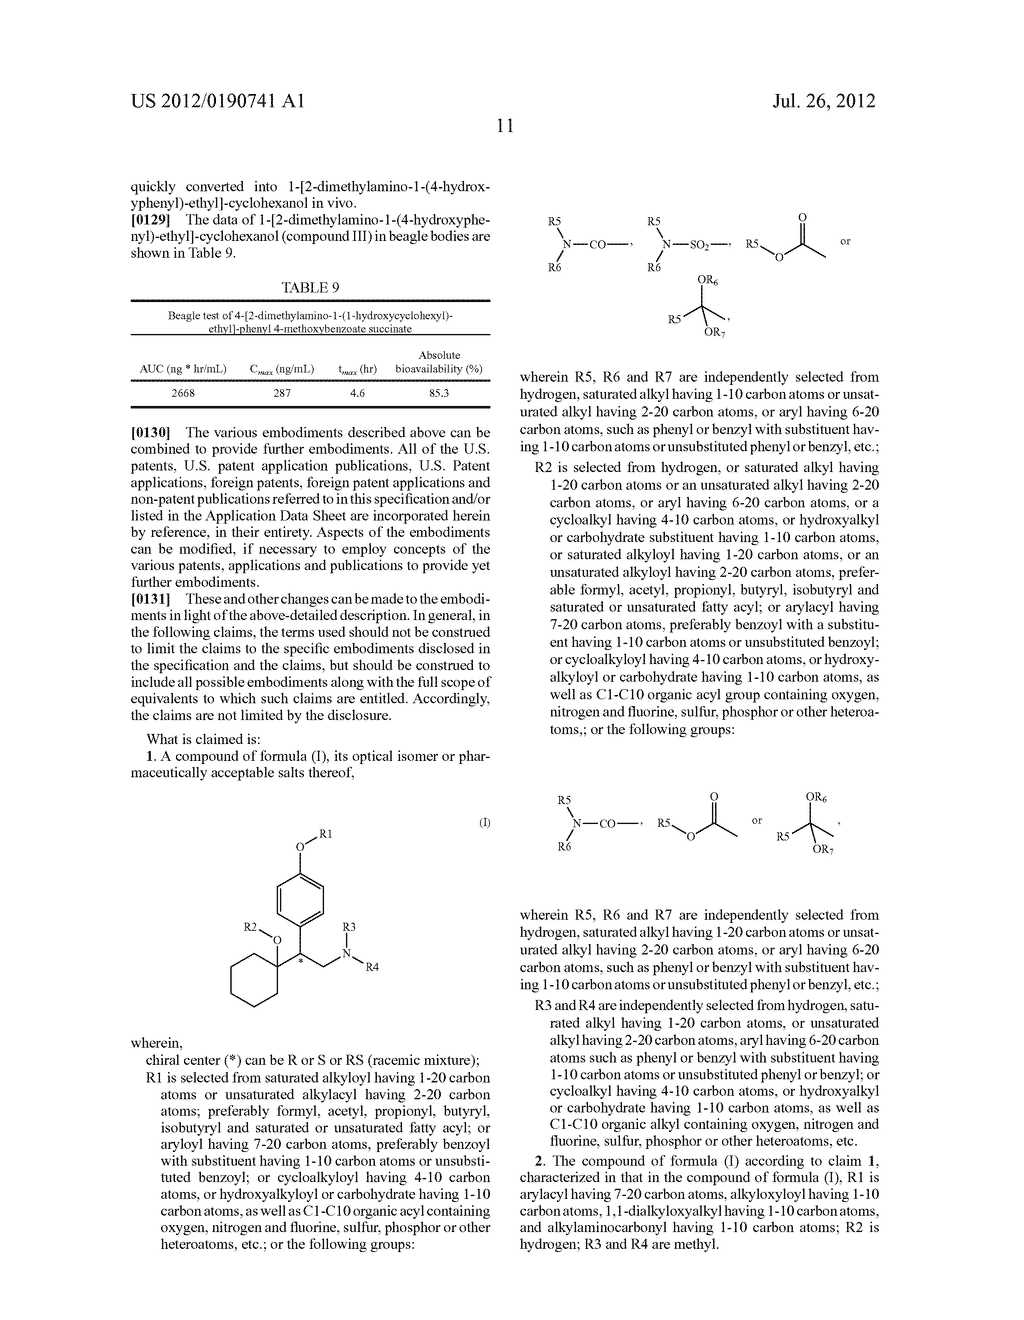 COMPOUNDS FOR INHIBITION OF 5-HYDROXYTRYPTAMINE AND NOREPINEPHRINE     REUPTAKE OR FOR TREATMENT OF DEPRESSION DISORDERS, THEIR PREPARATION     PROCESSES AND USES THEREOF - diagram, schematic, and image 14